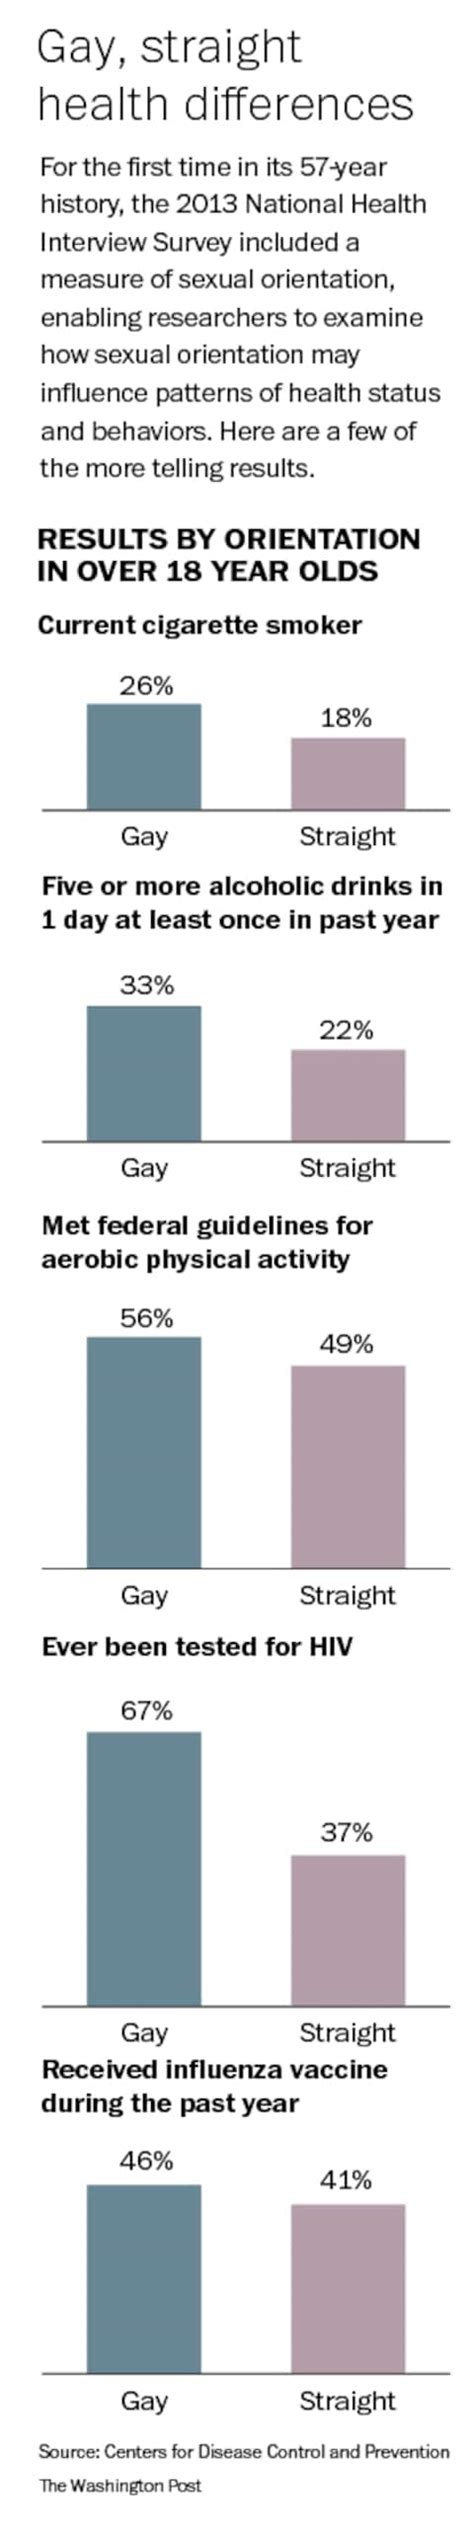 health survey gives government its first large scale data on gay